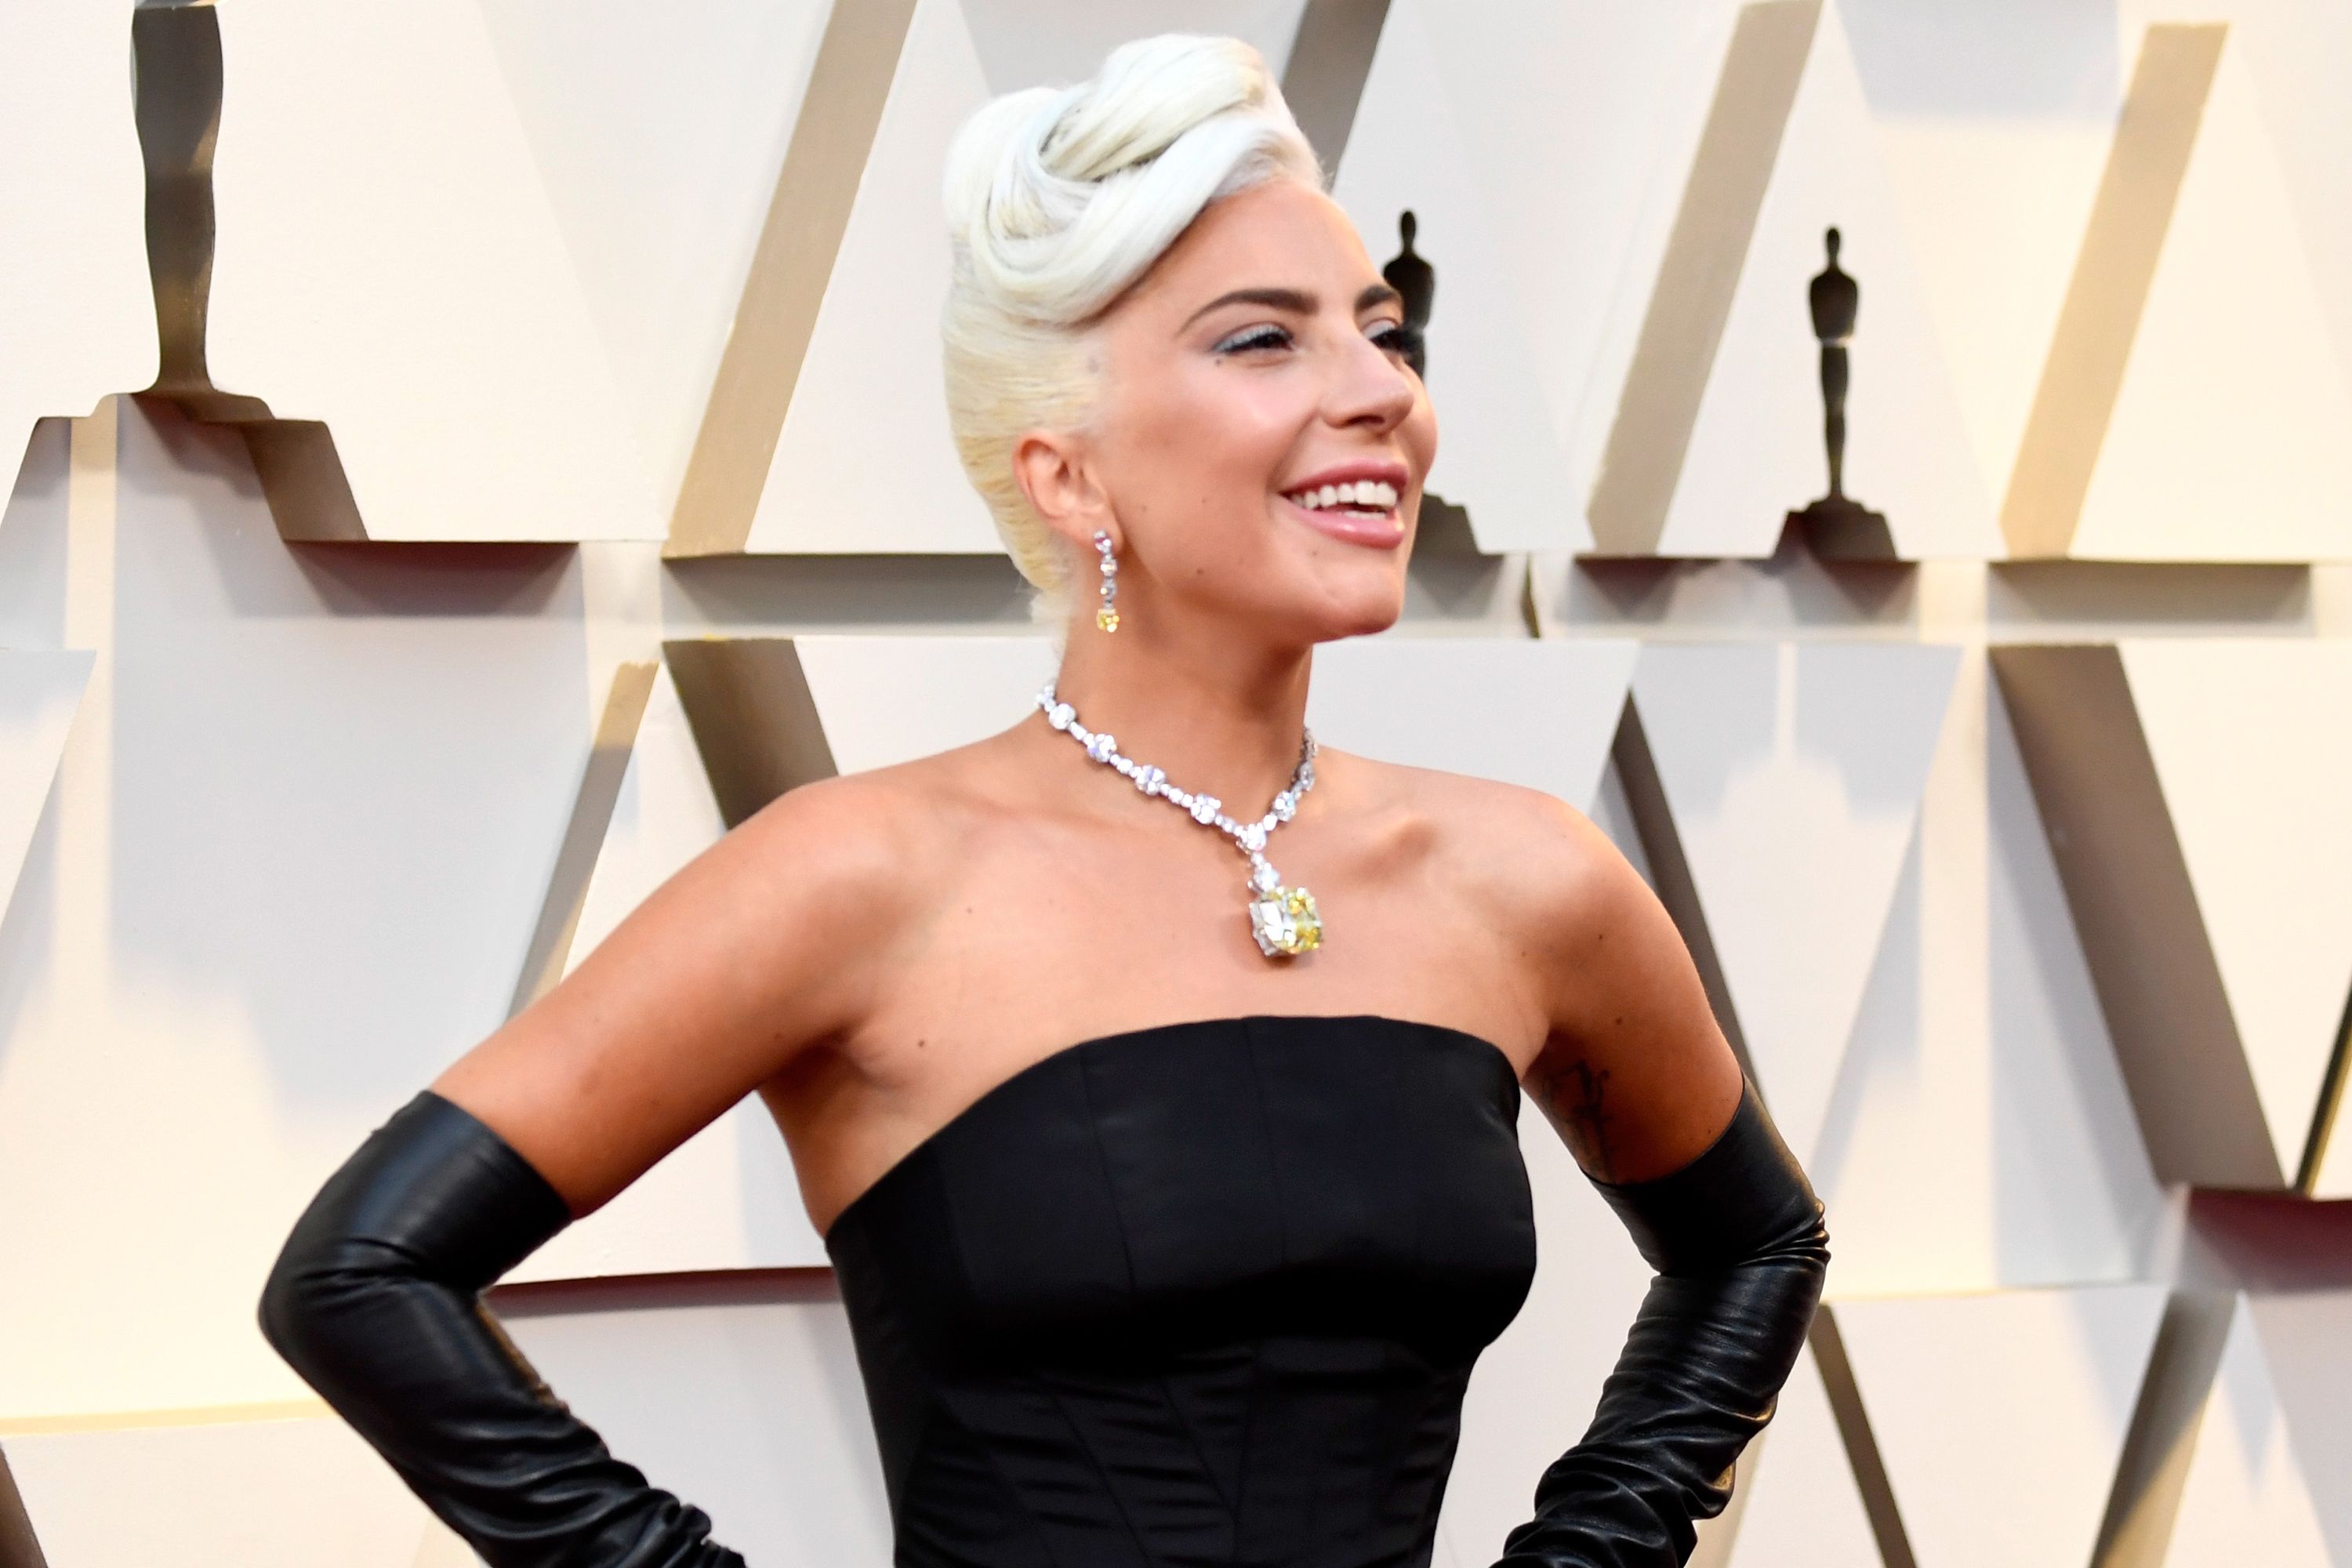 necklace lady gaga wore at the oscars